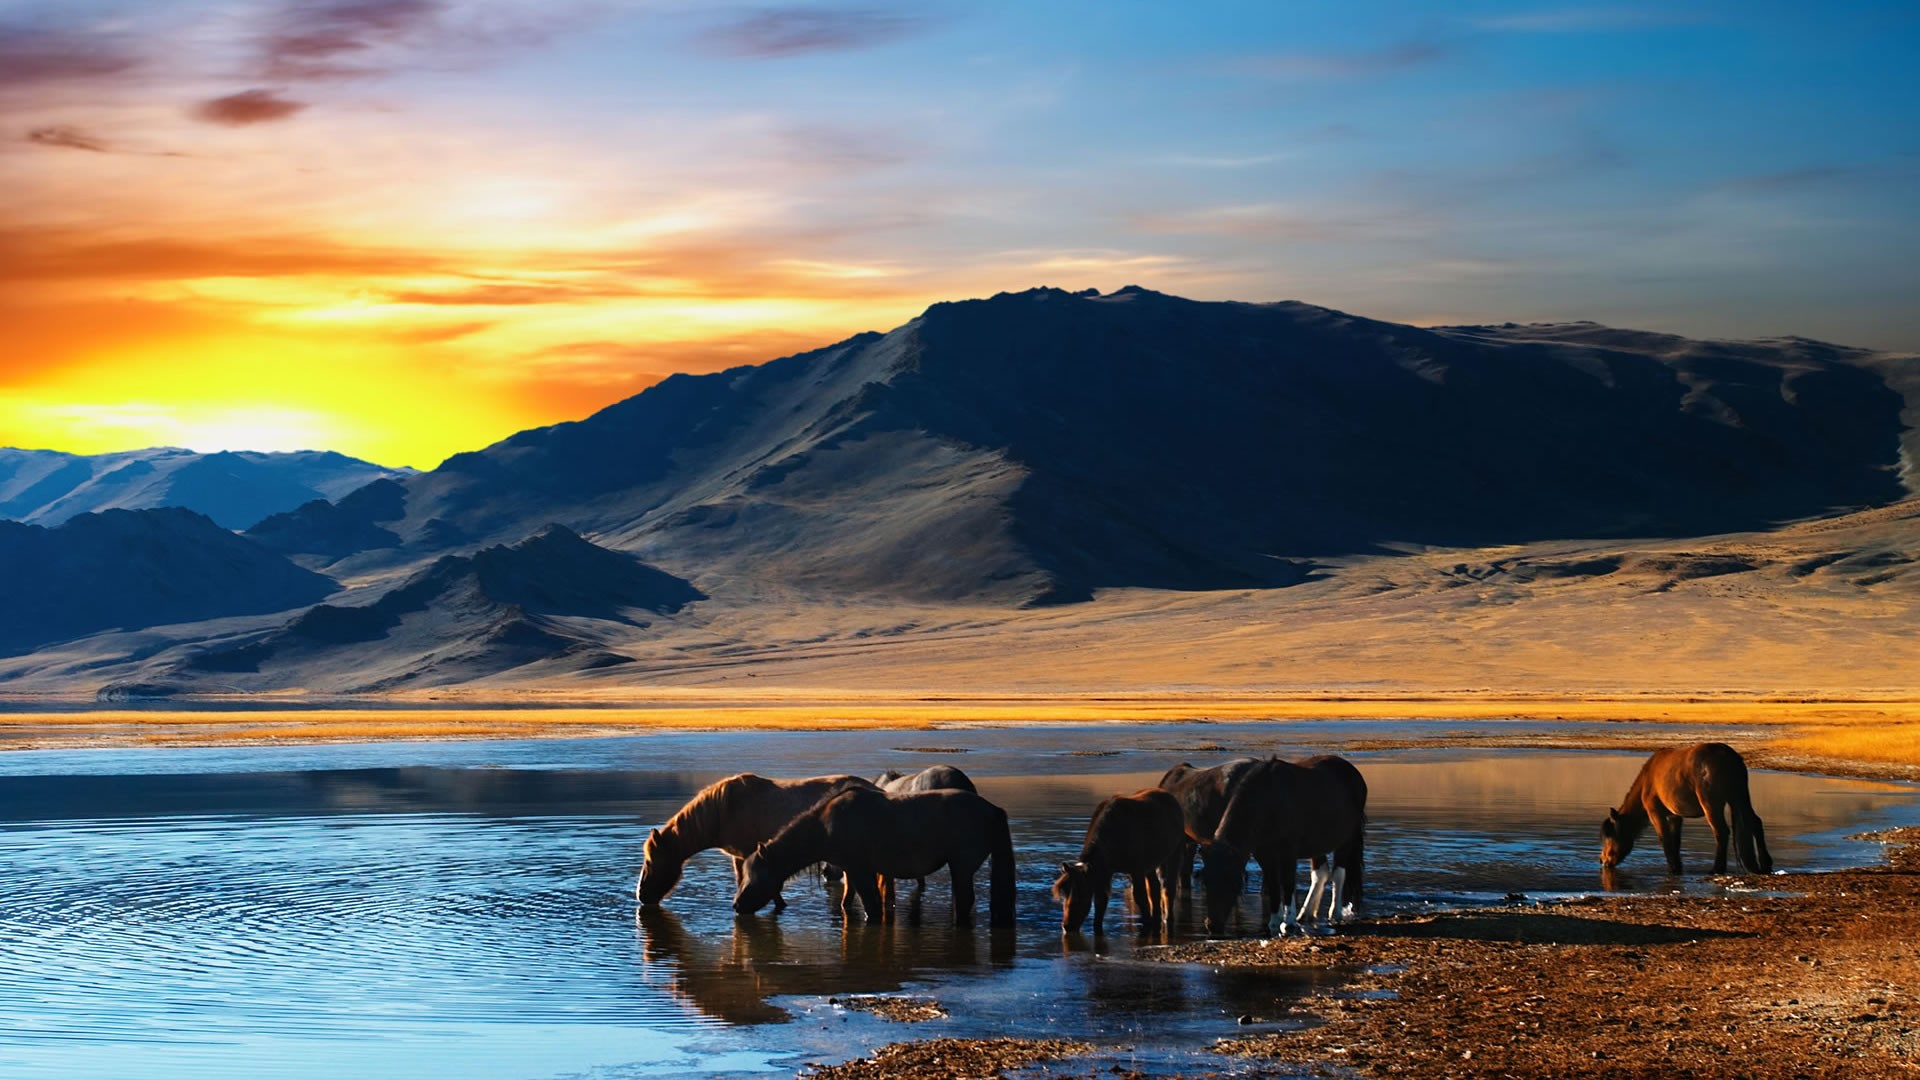 General 1920x1080 landscape horse sunset mountains lake animals mammals water water ripples orange sky nature outdoors